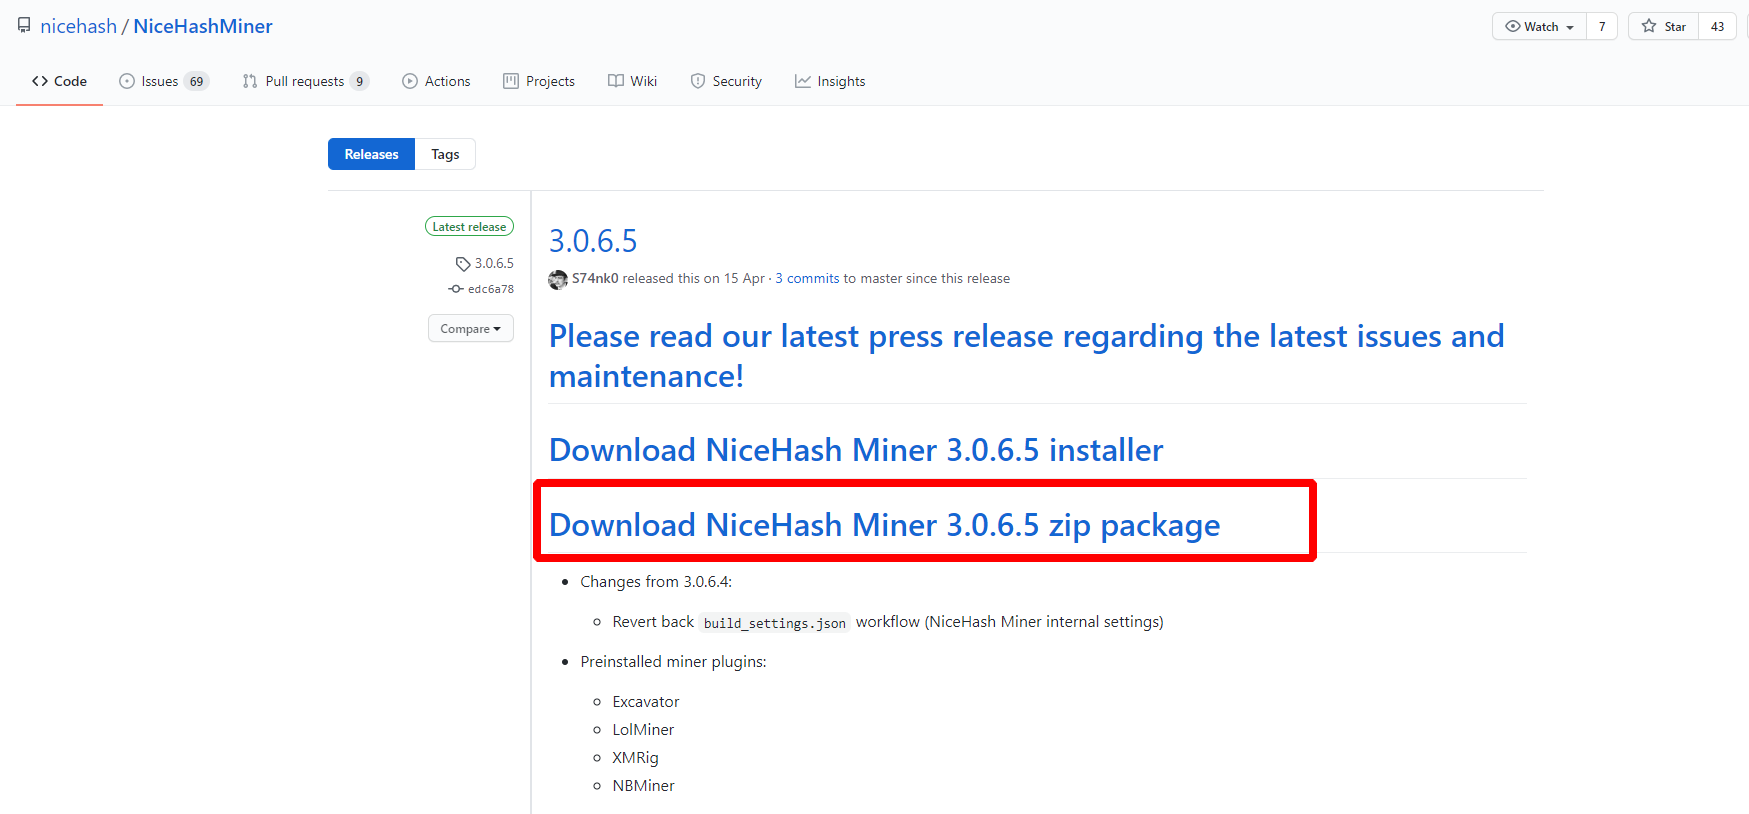 NiceHash Miner 3.0.6.5: Download, Setup for ETH, Review